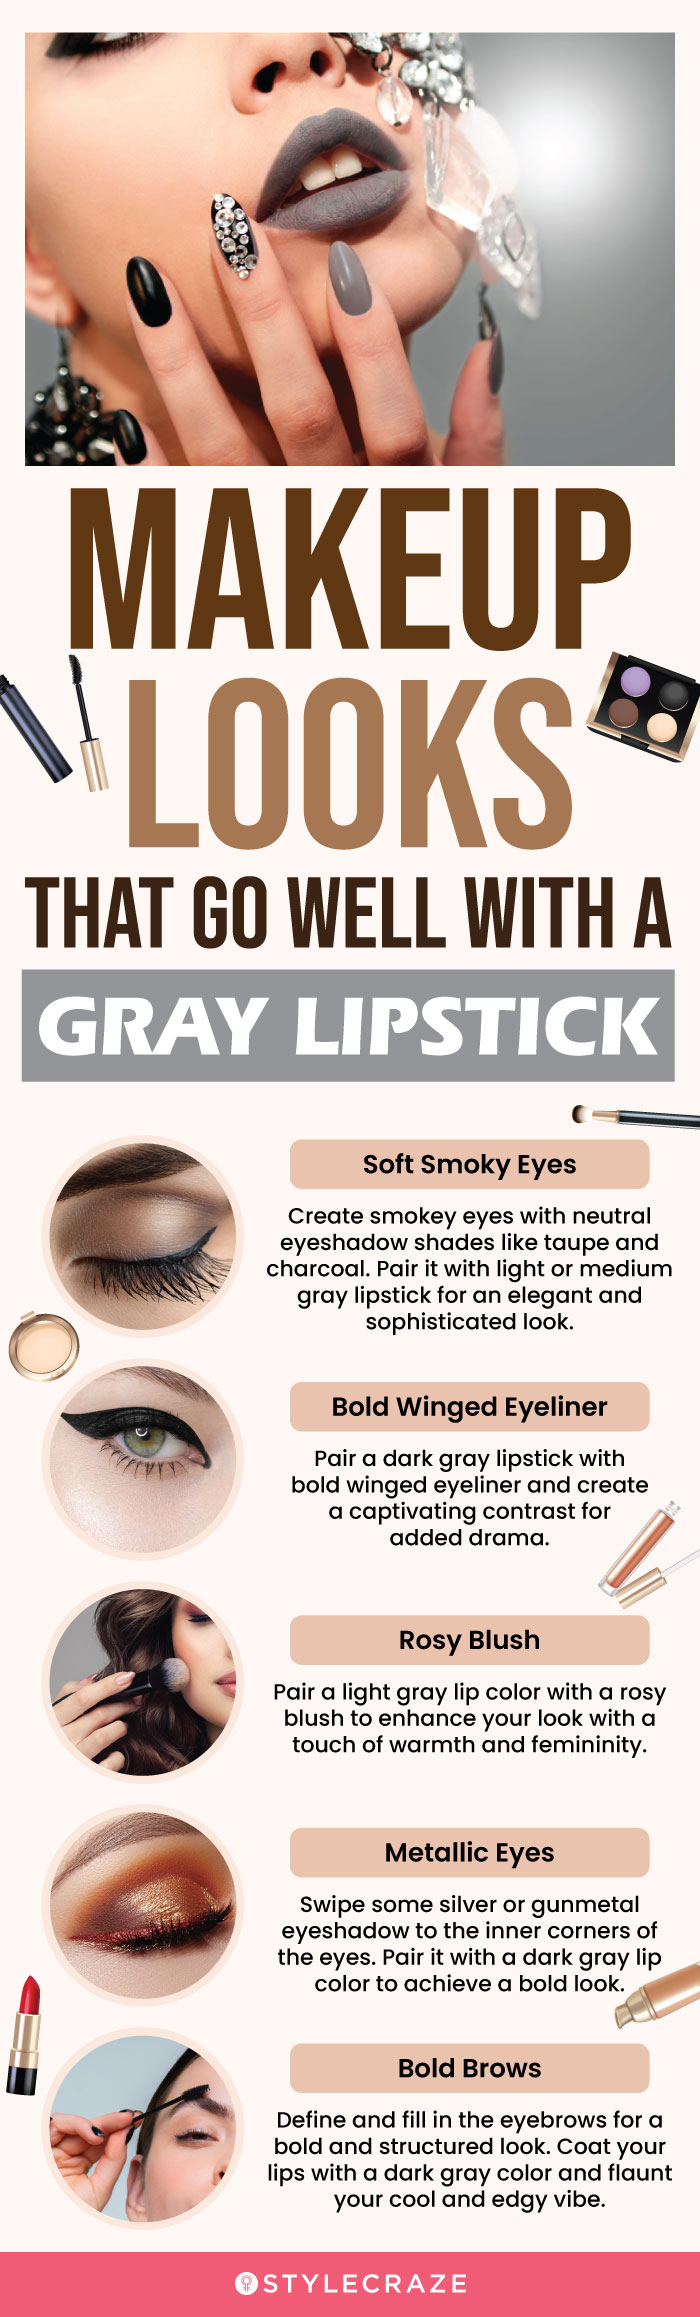 Makeup Looks That Go Well With A Gray Lipstick (infographic)